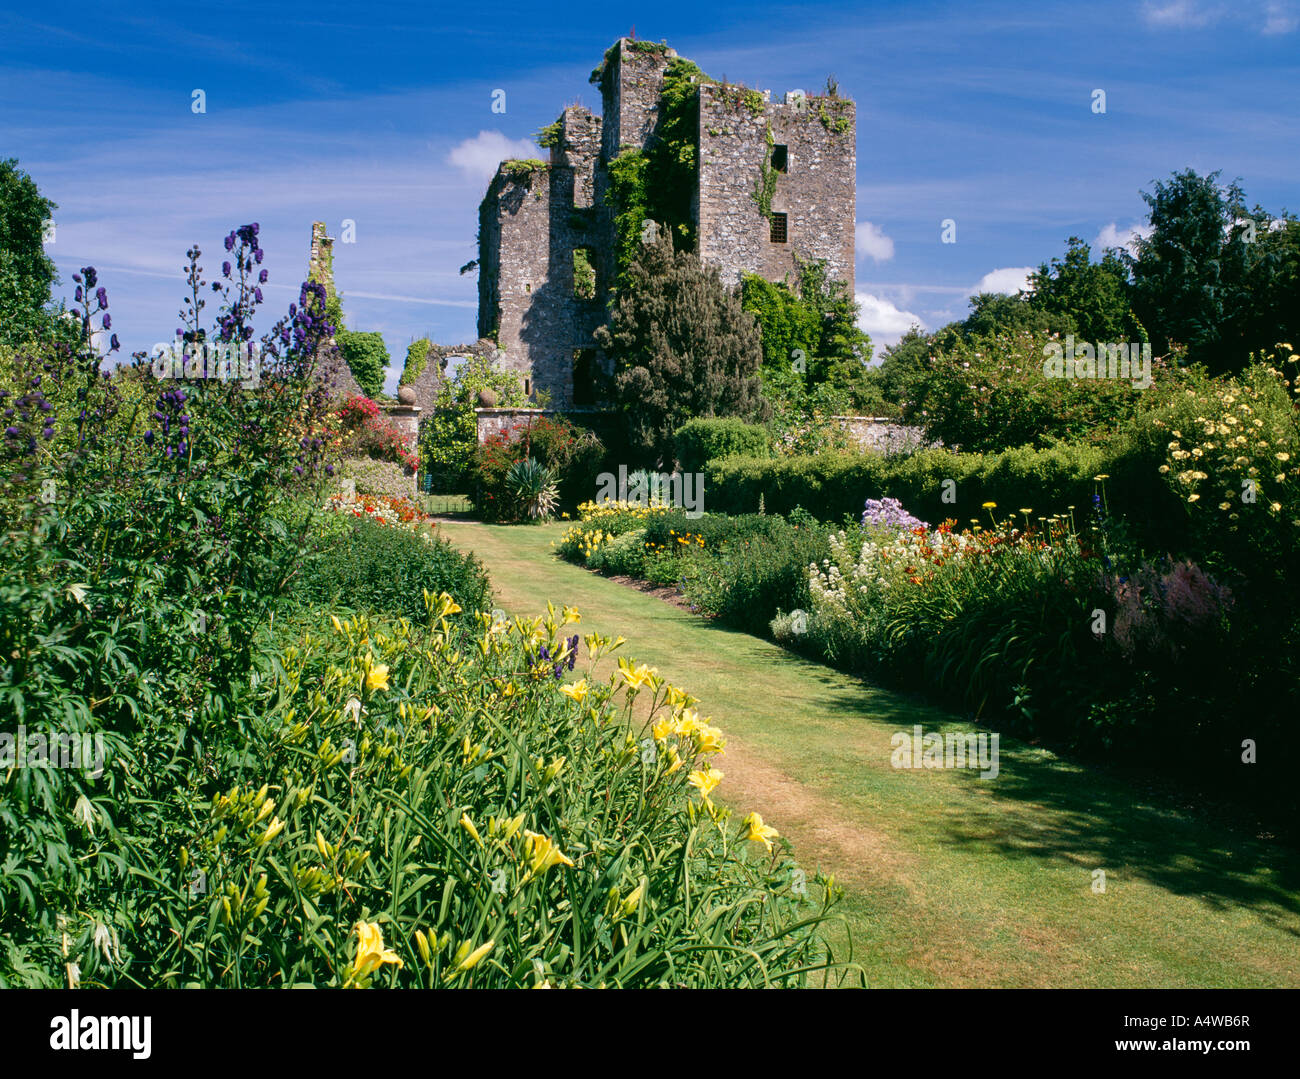 Scottish garden Castle Kennedy Gardens looking up to the ruins of Castle Kennedy near Stranraer Scotland UK Stock Photo